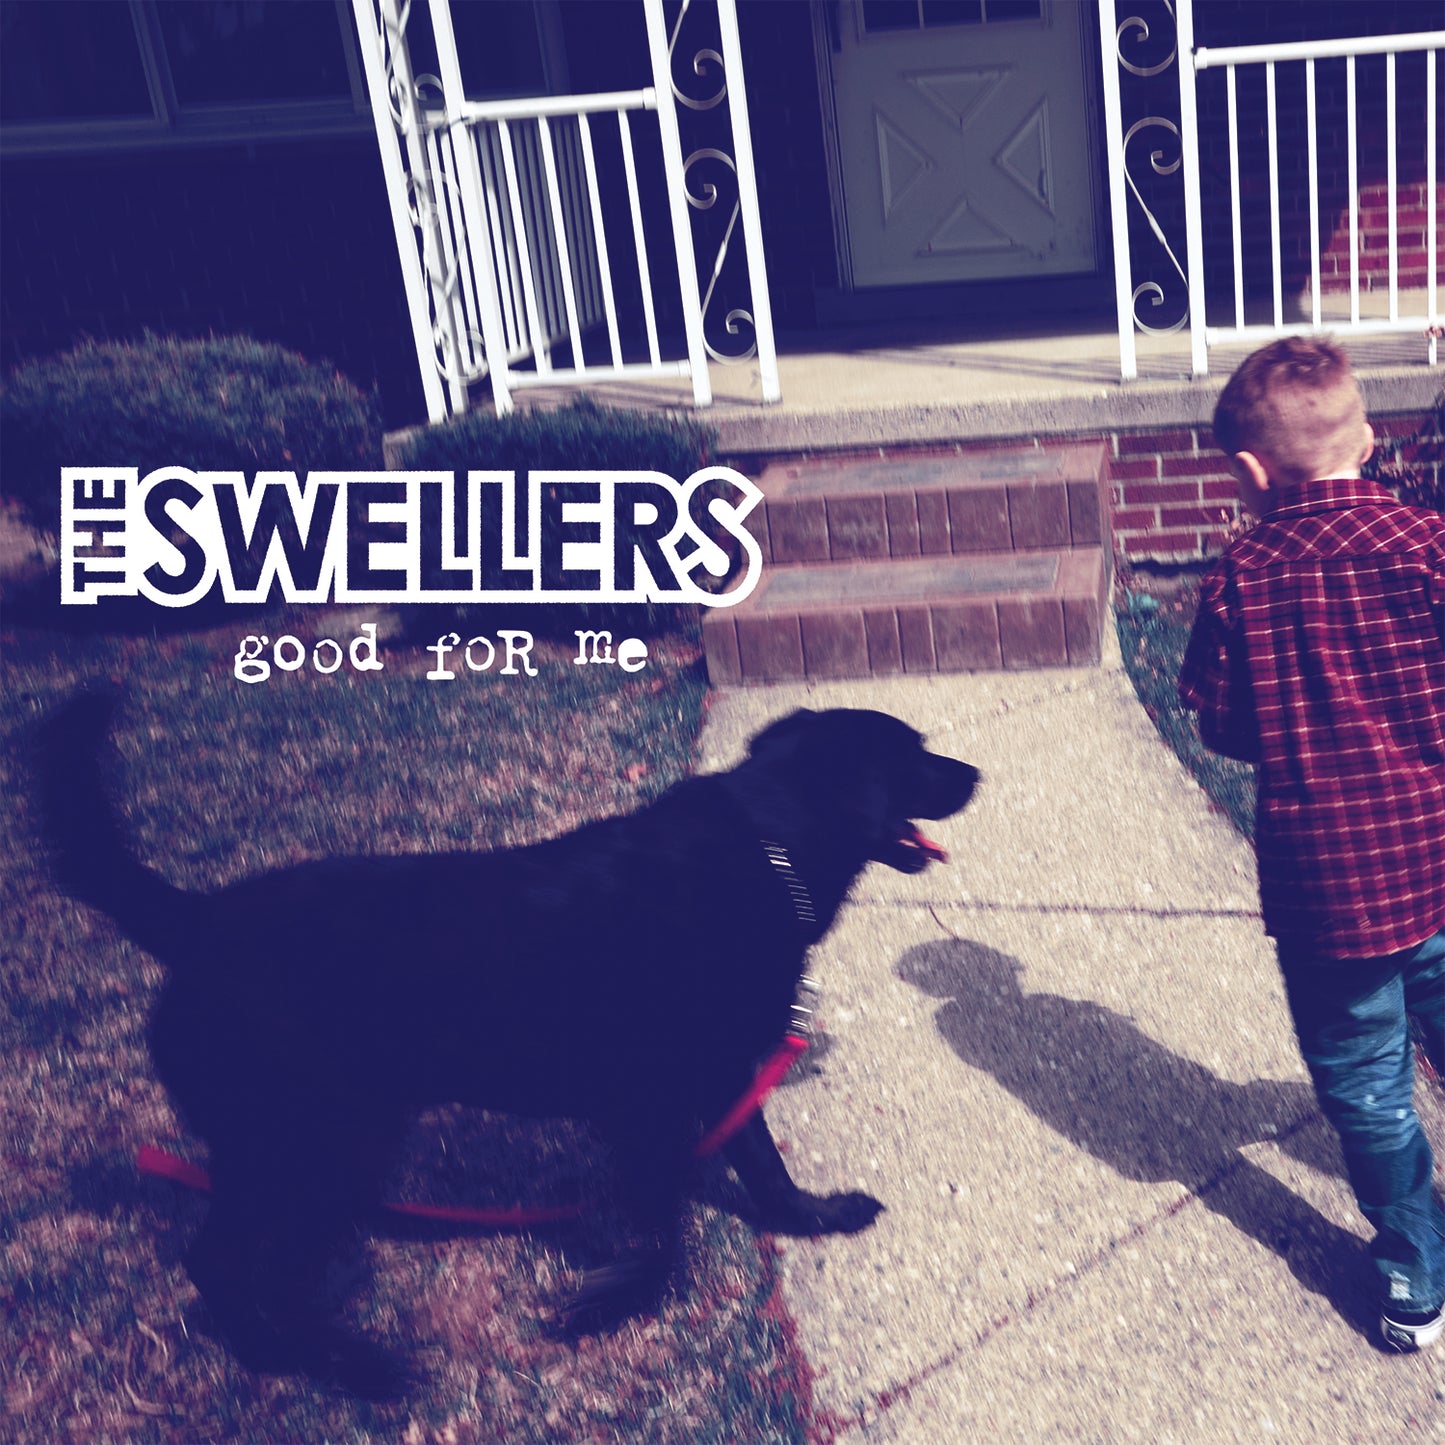 The Swellers - "Good for Me"